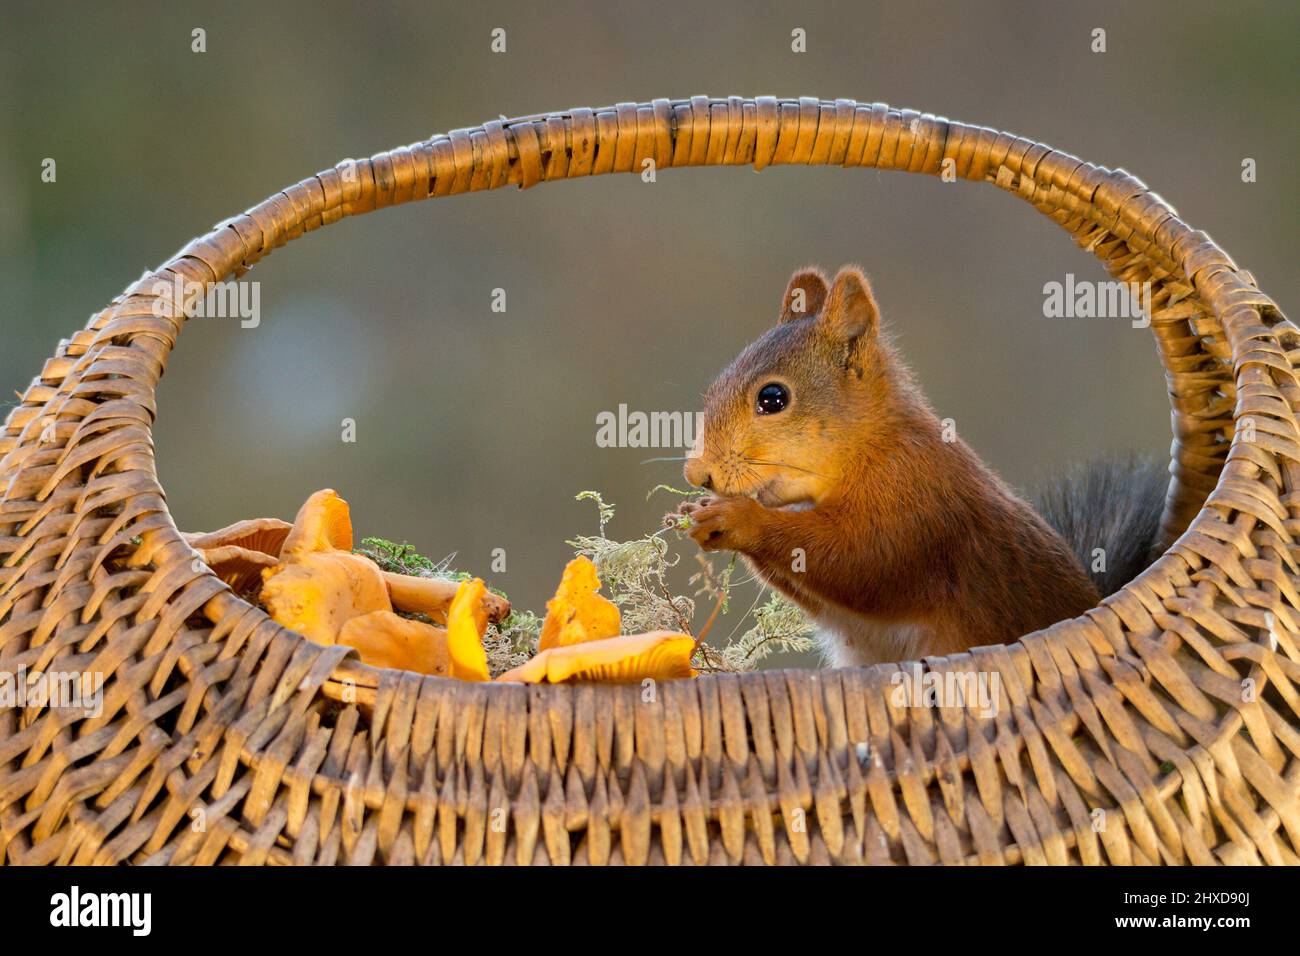 squirrel sitting in basket with eatable mushrooms Stock Photo